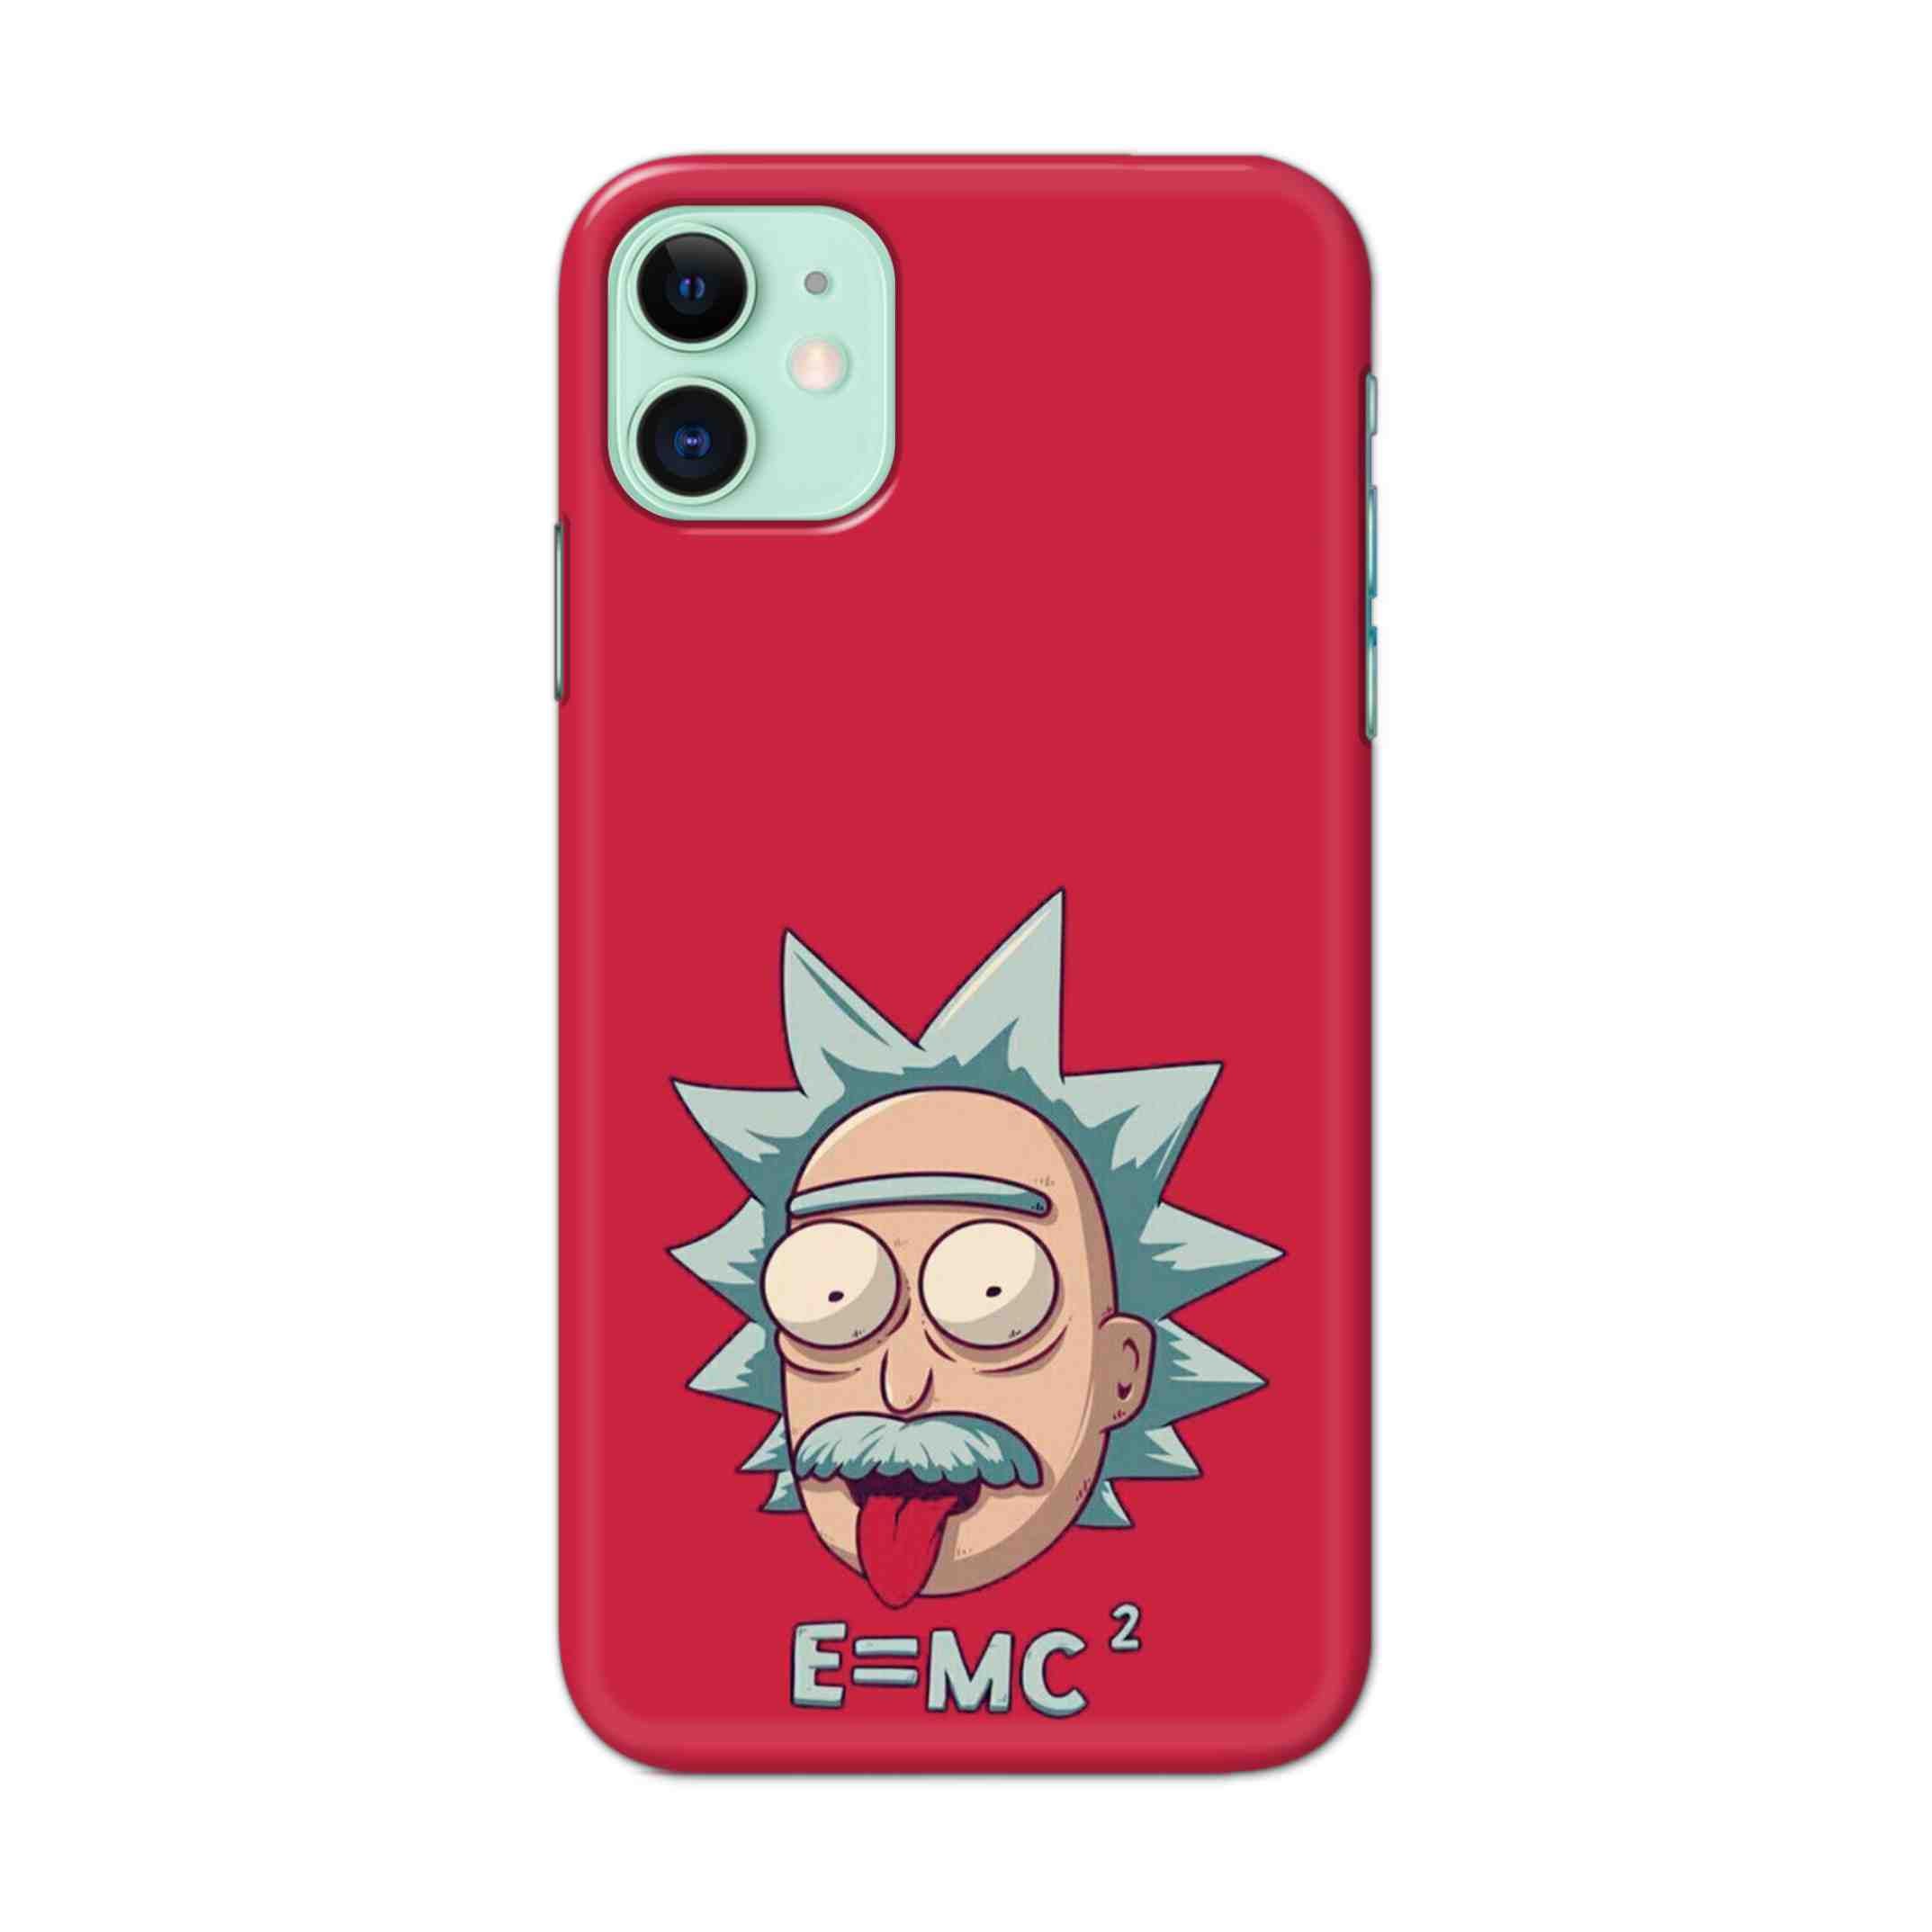 Buy E=Mc Hard Back Mobile Phone Case/Cover For iPhone 11 Online